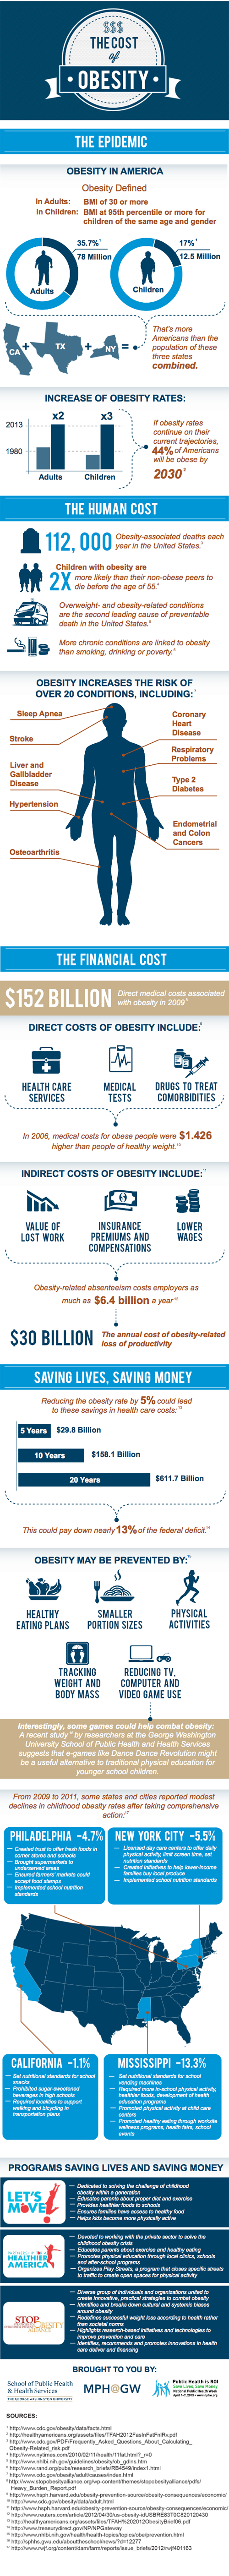 Infographic: The cost of obesity